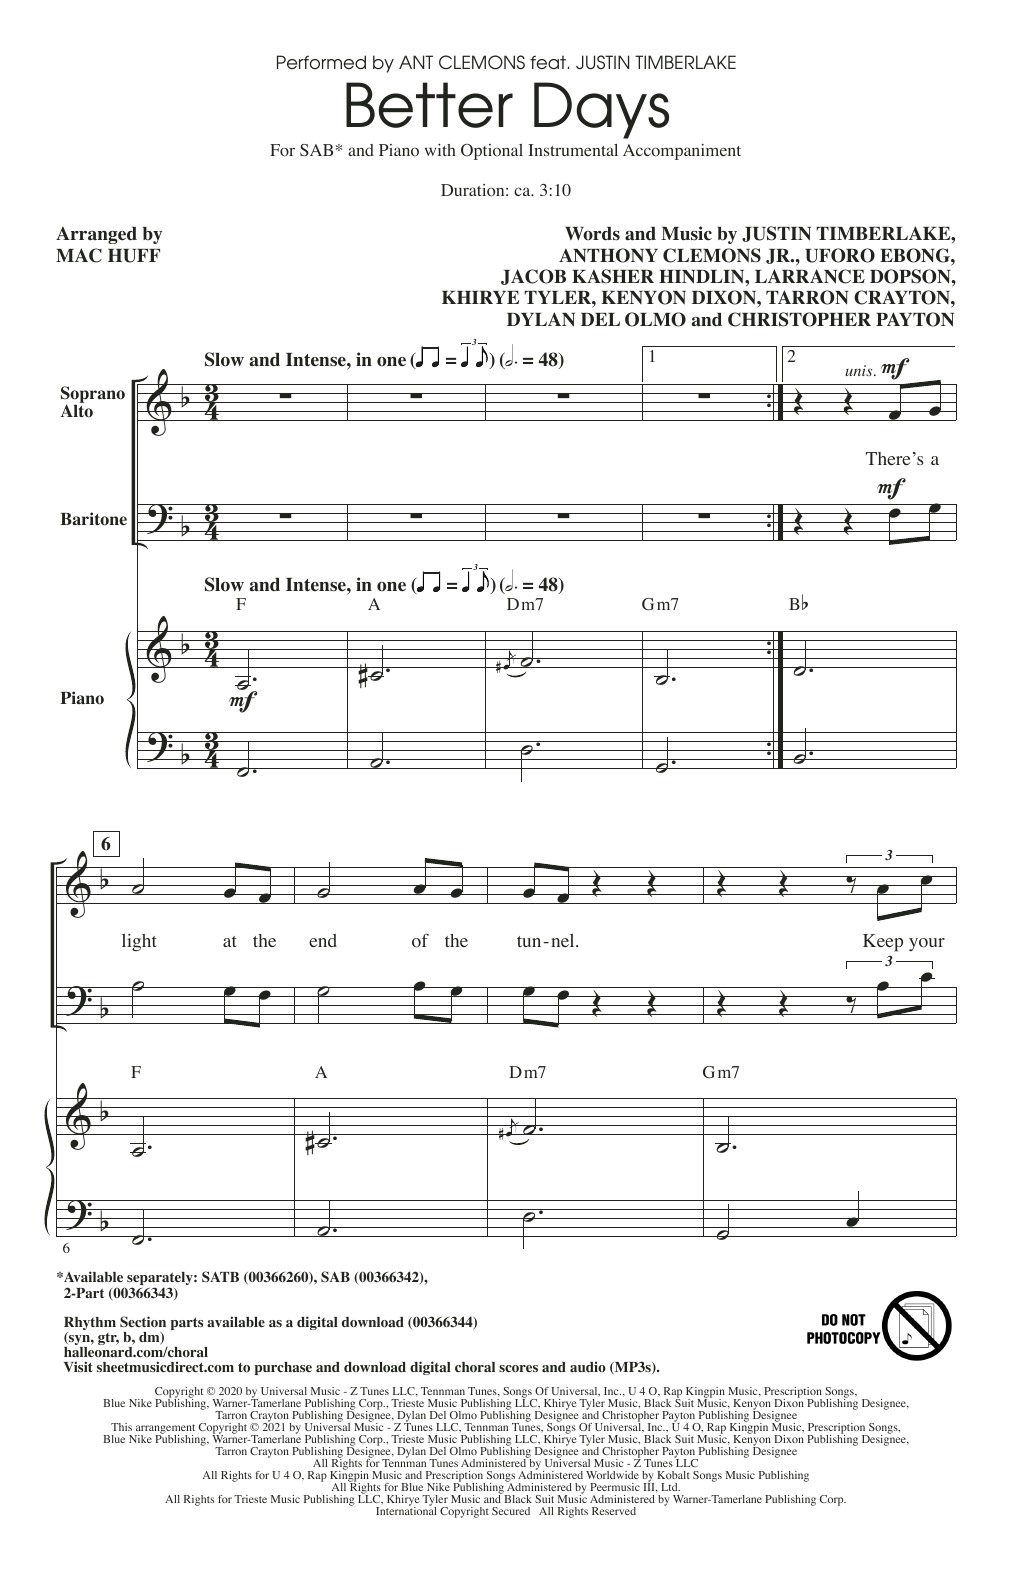 Ant Clemons feat. Justin Timberlake Better Days (arr. Mac Huff) sheet music notes and chords. Download Printable PDF.